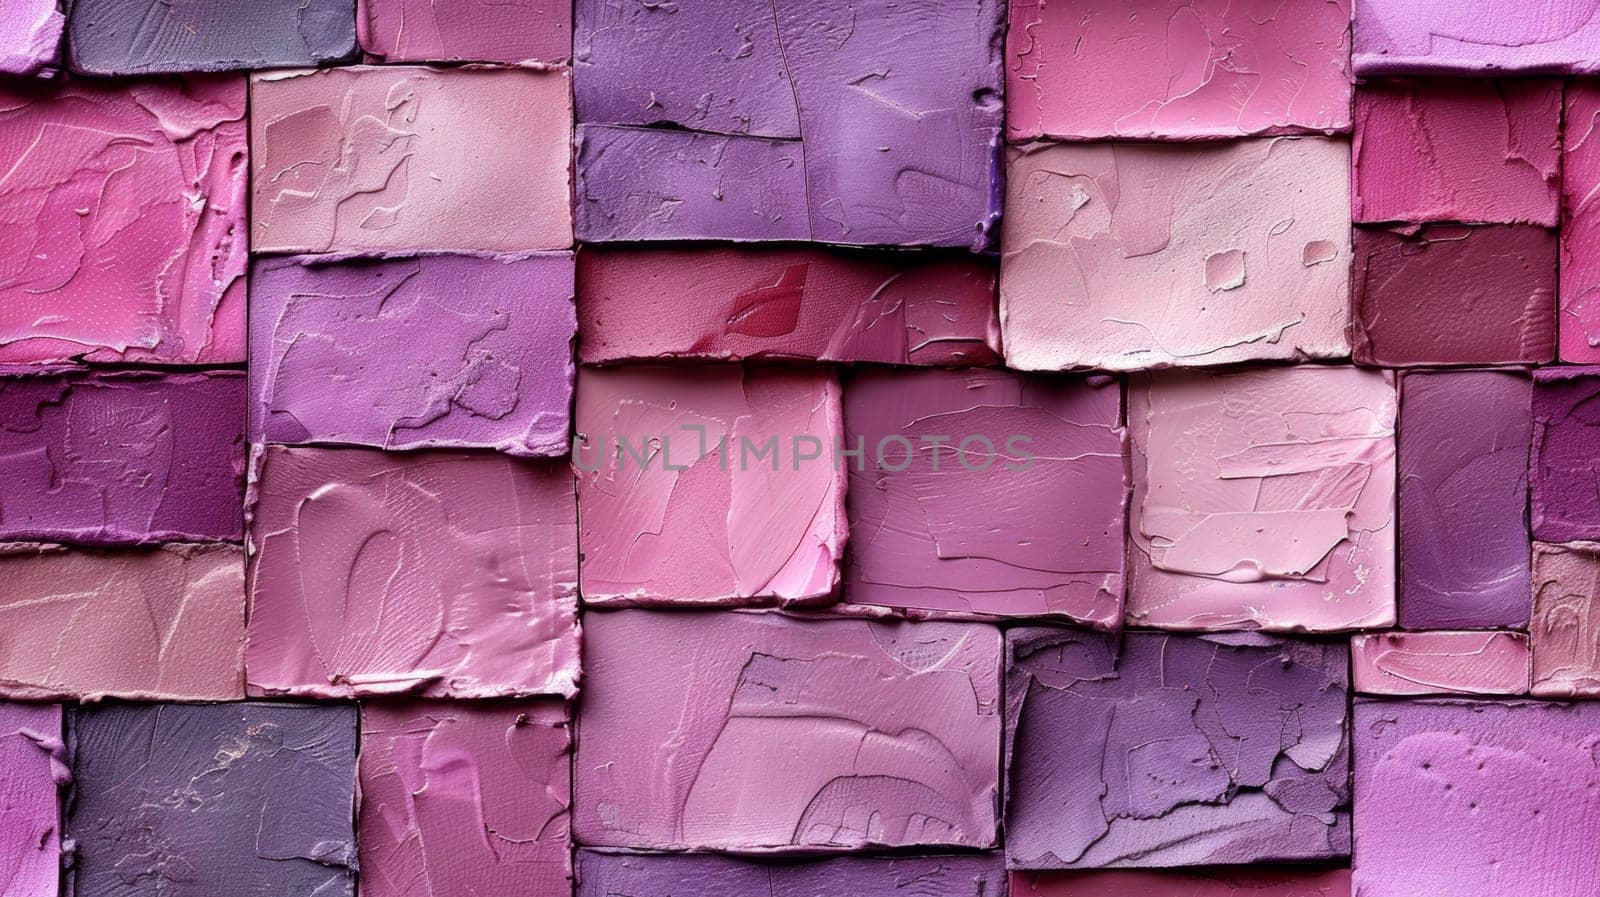 A wall made of pink and purple makeup. The wall is made of different shades of pink and purple, and it looks like a painting